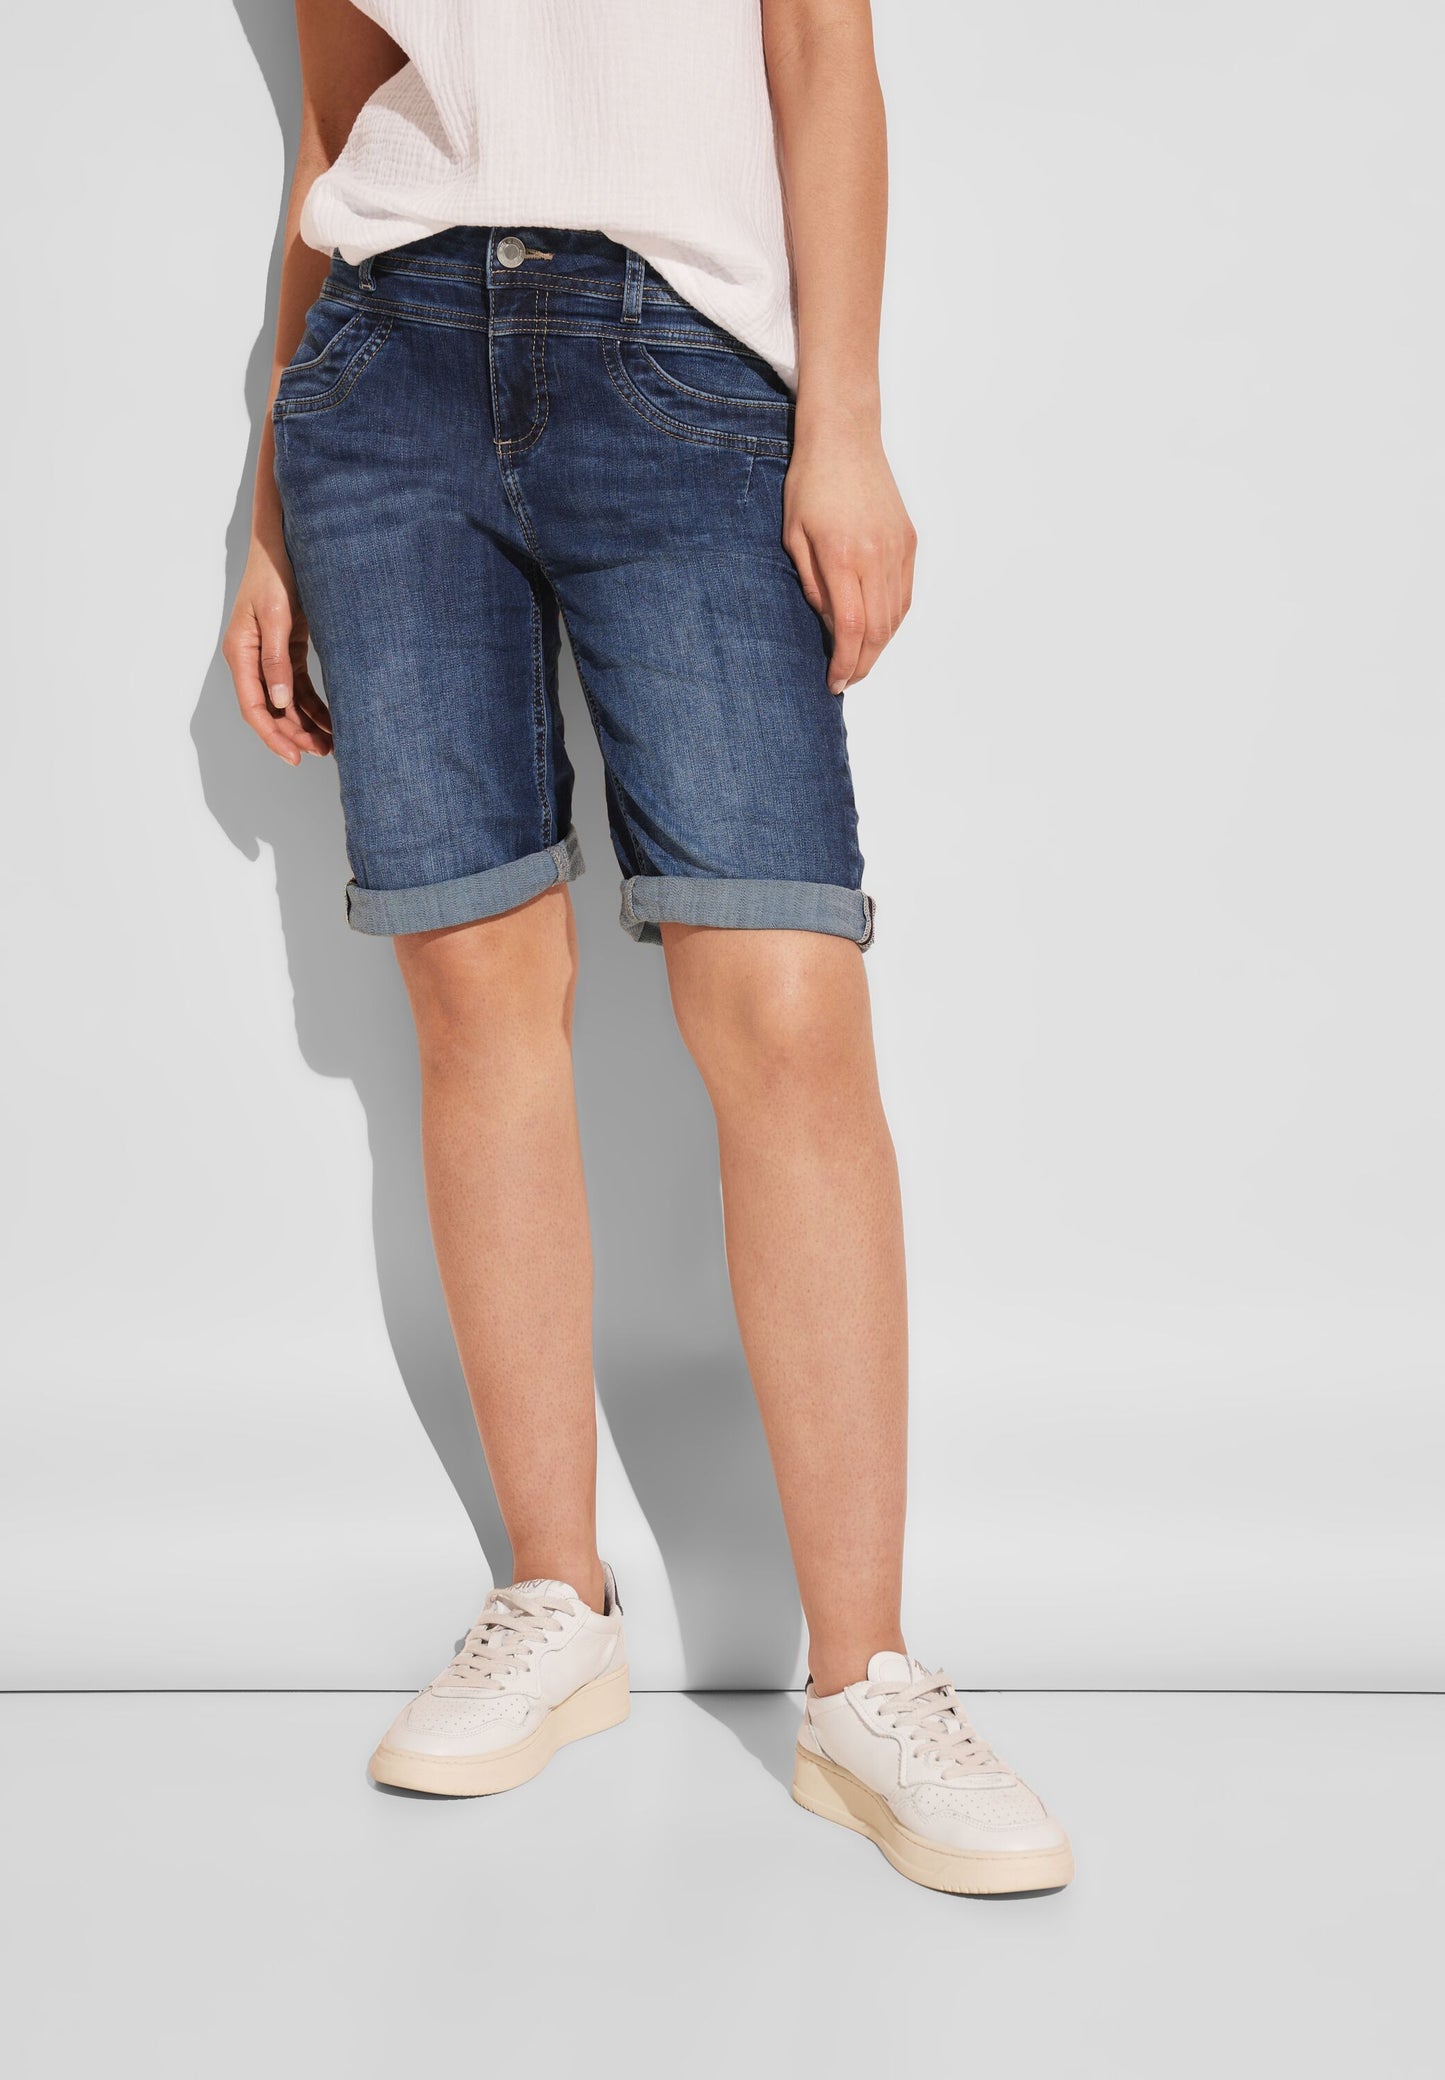 Street One - Casual Fit Jeans Shorts - blue washed soft